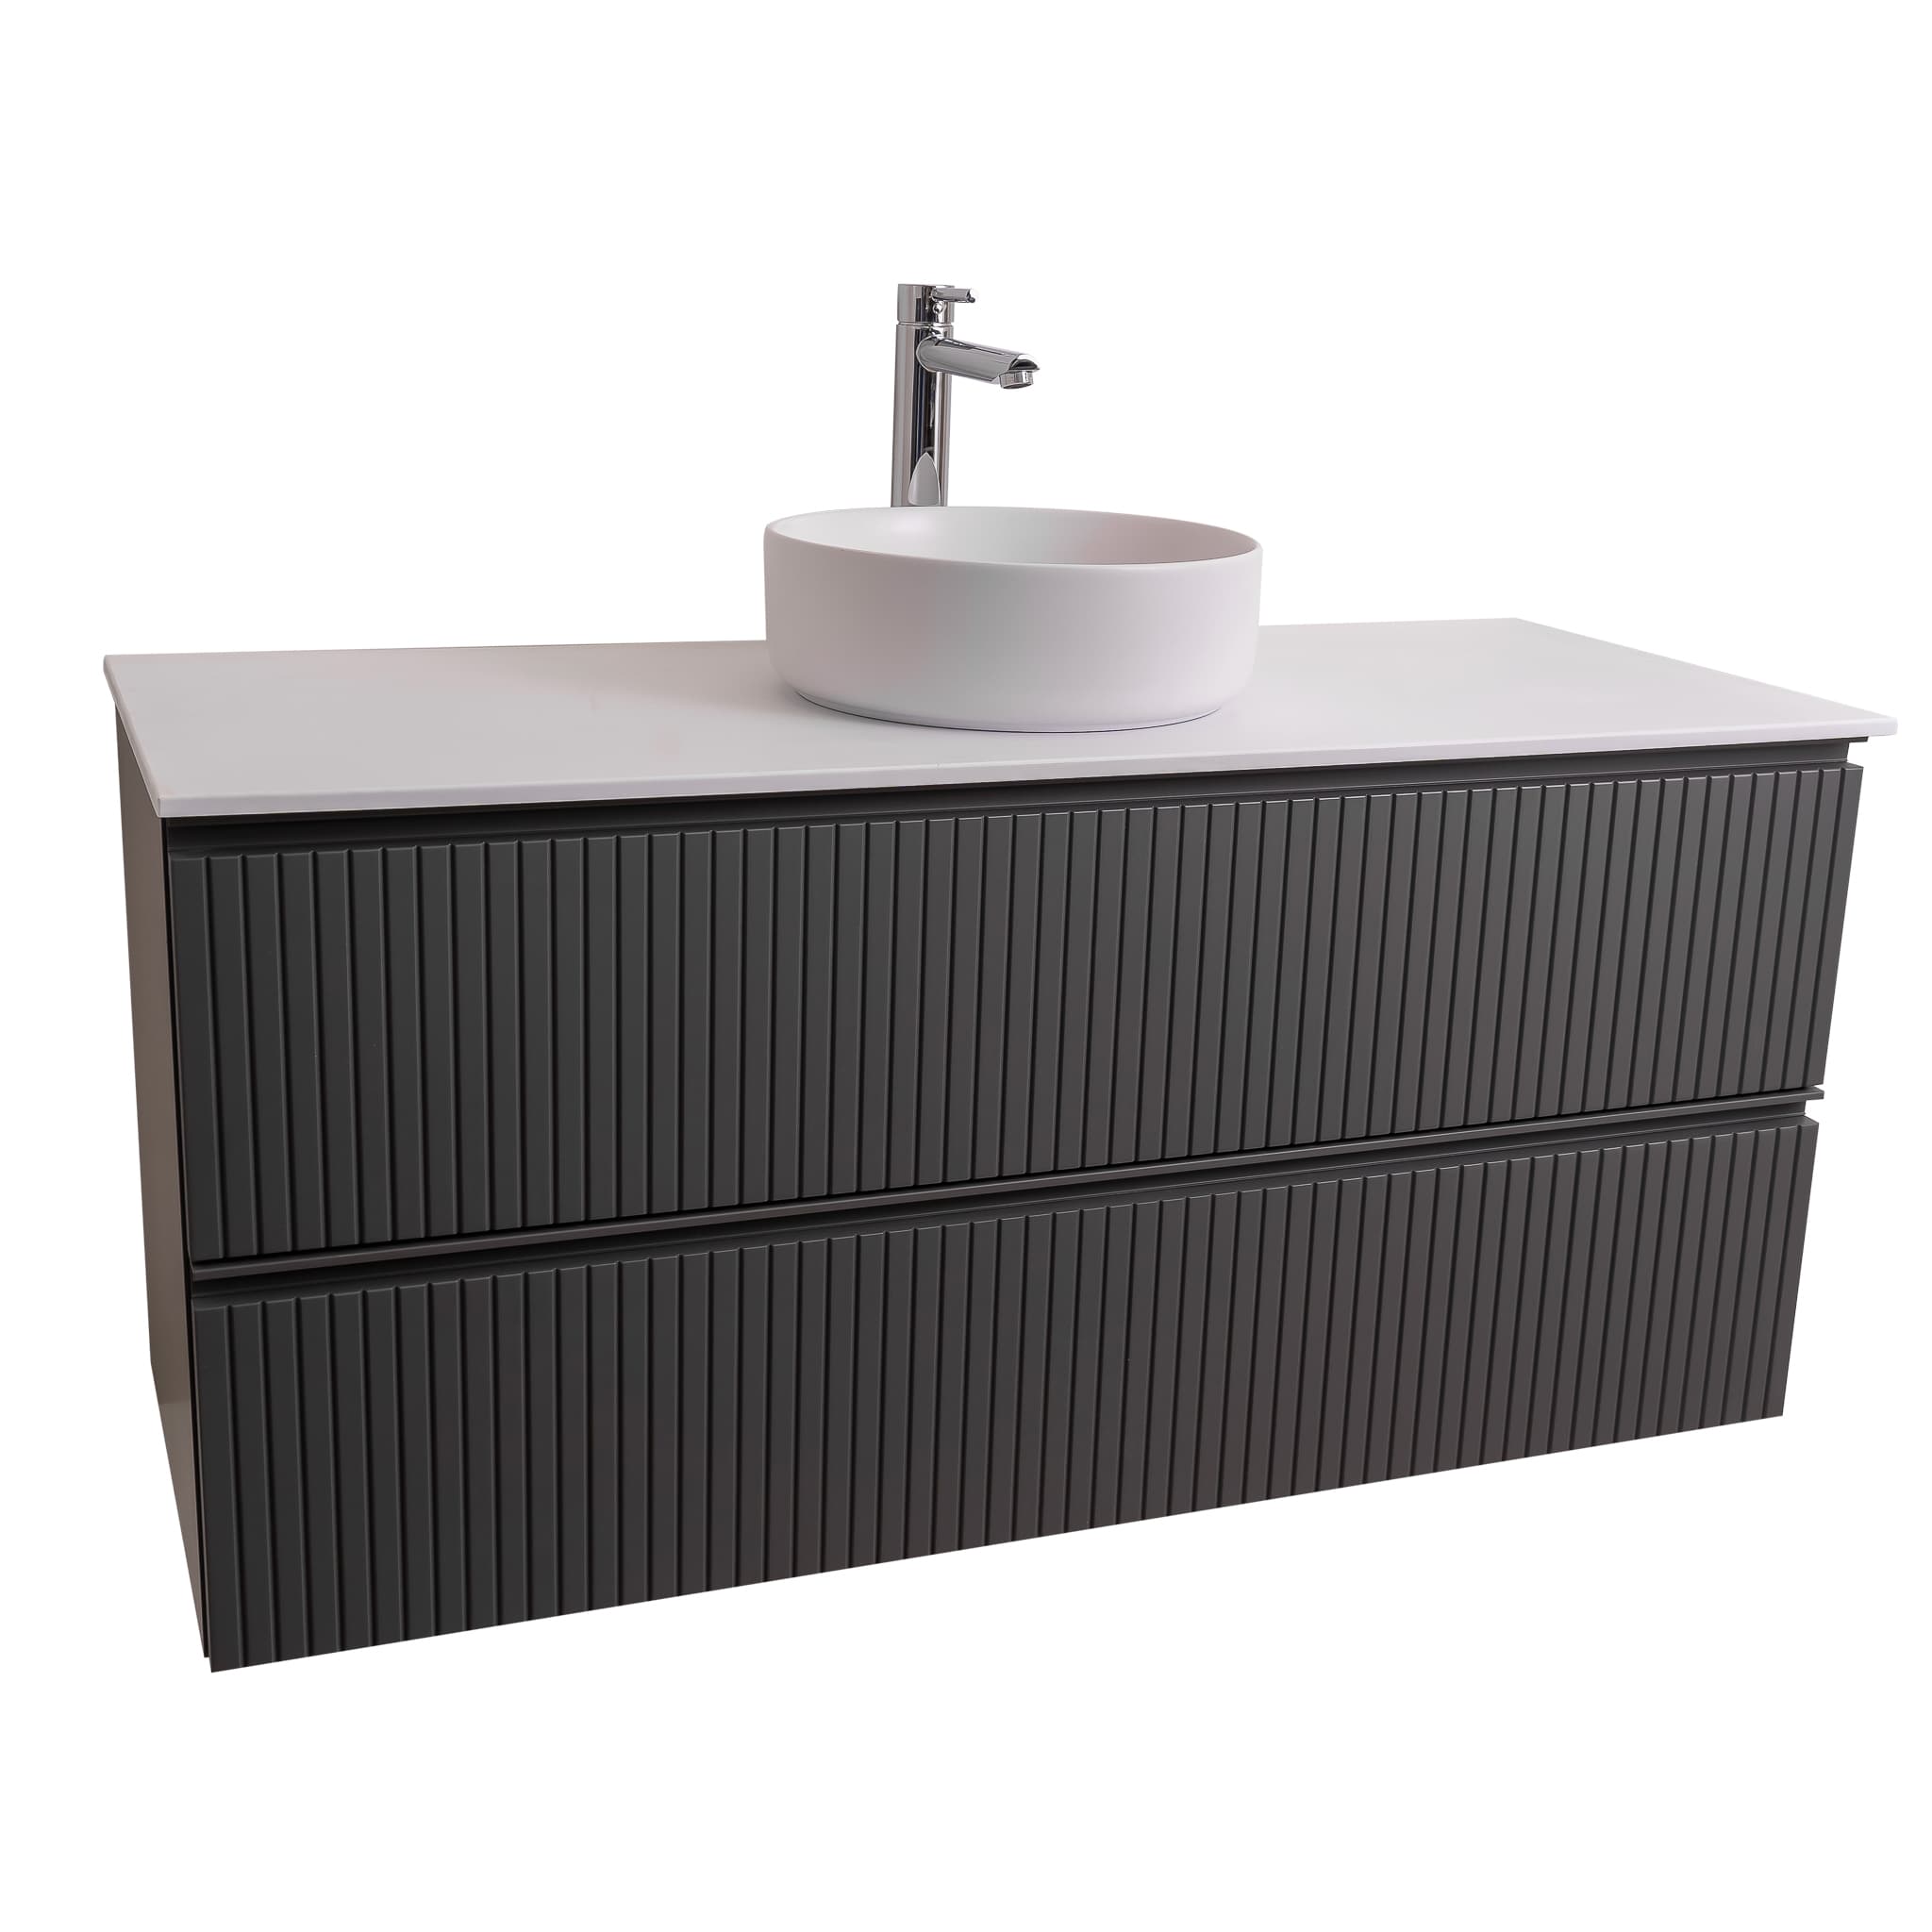 Ares 47.5 Matte Grey Cabinet, Ares White Top And Ares White Ceramic Basin, Wall Mounted Modern Vanity Set